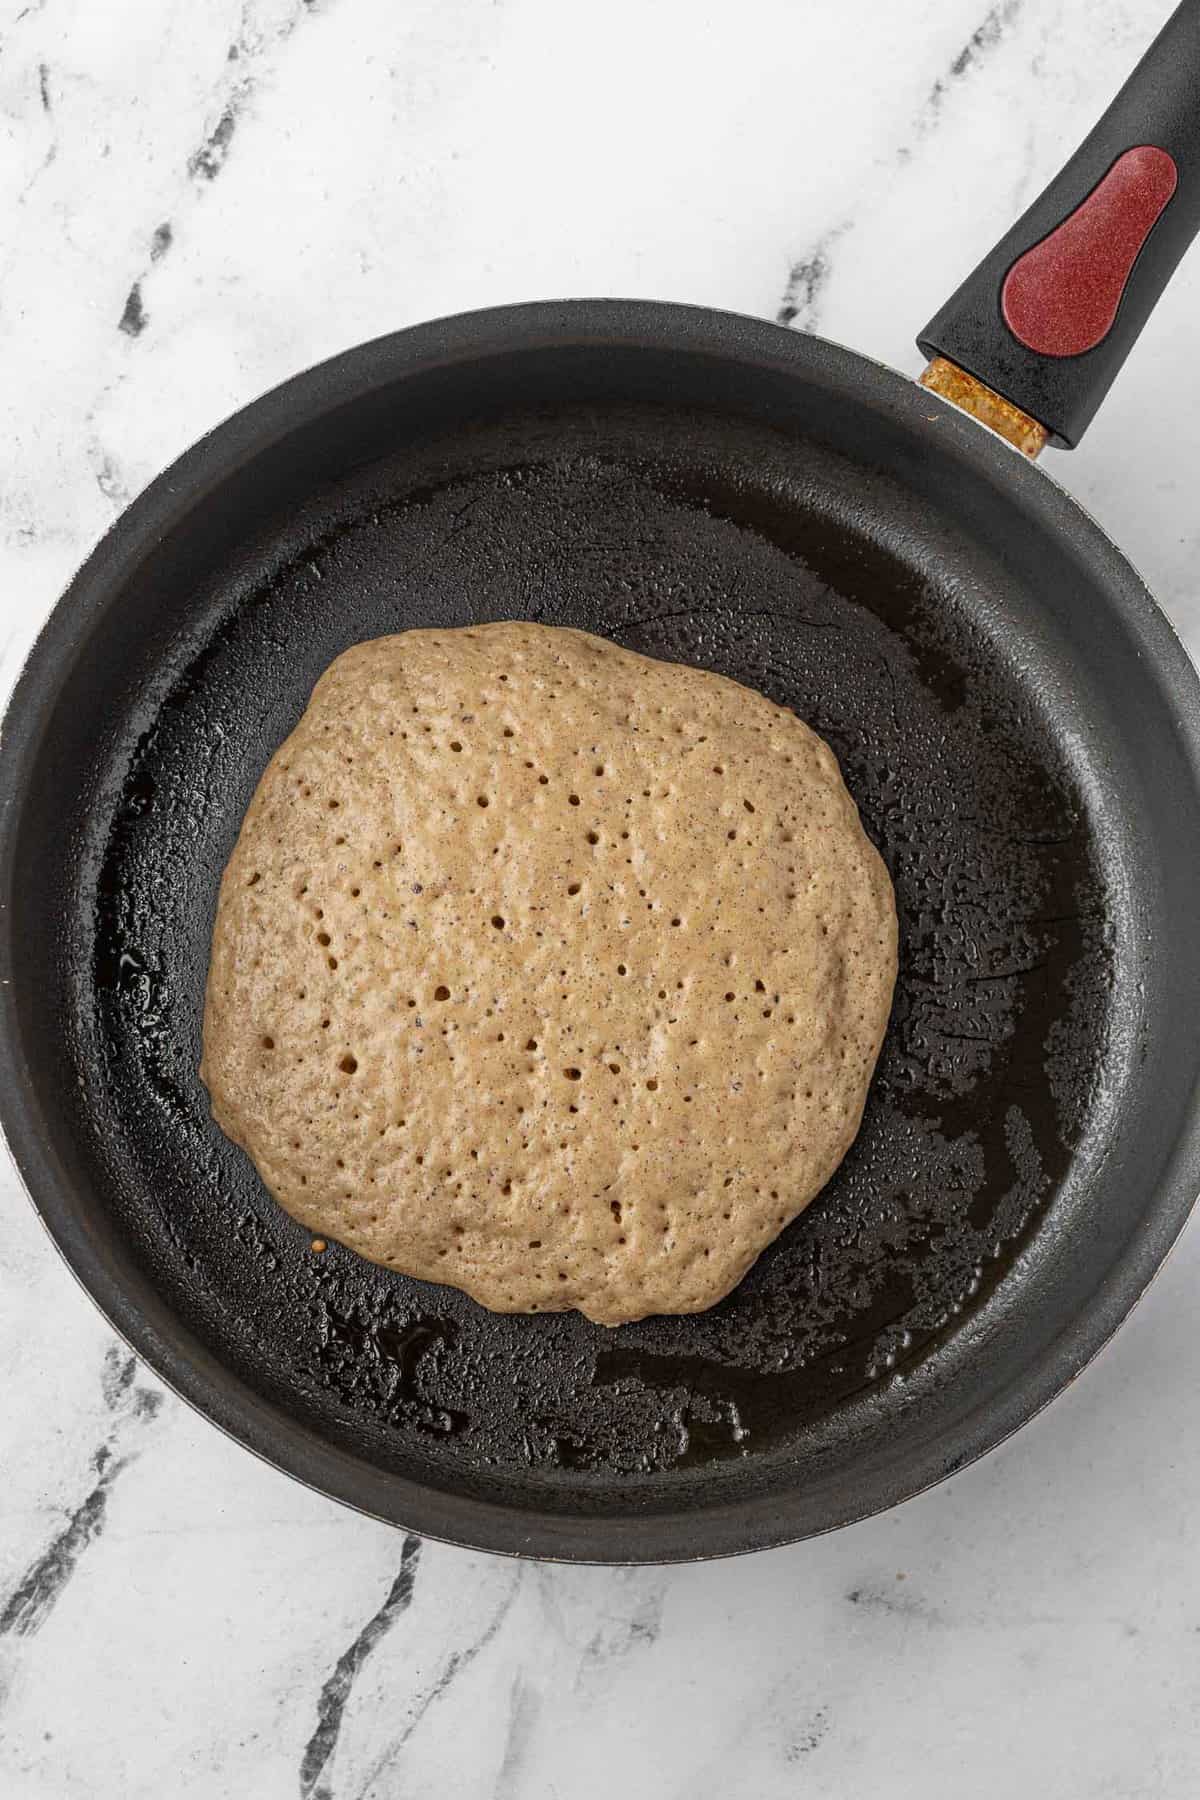 Pancake in a skillet, half cooked.